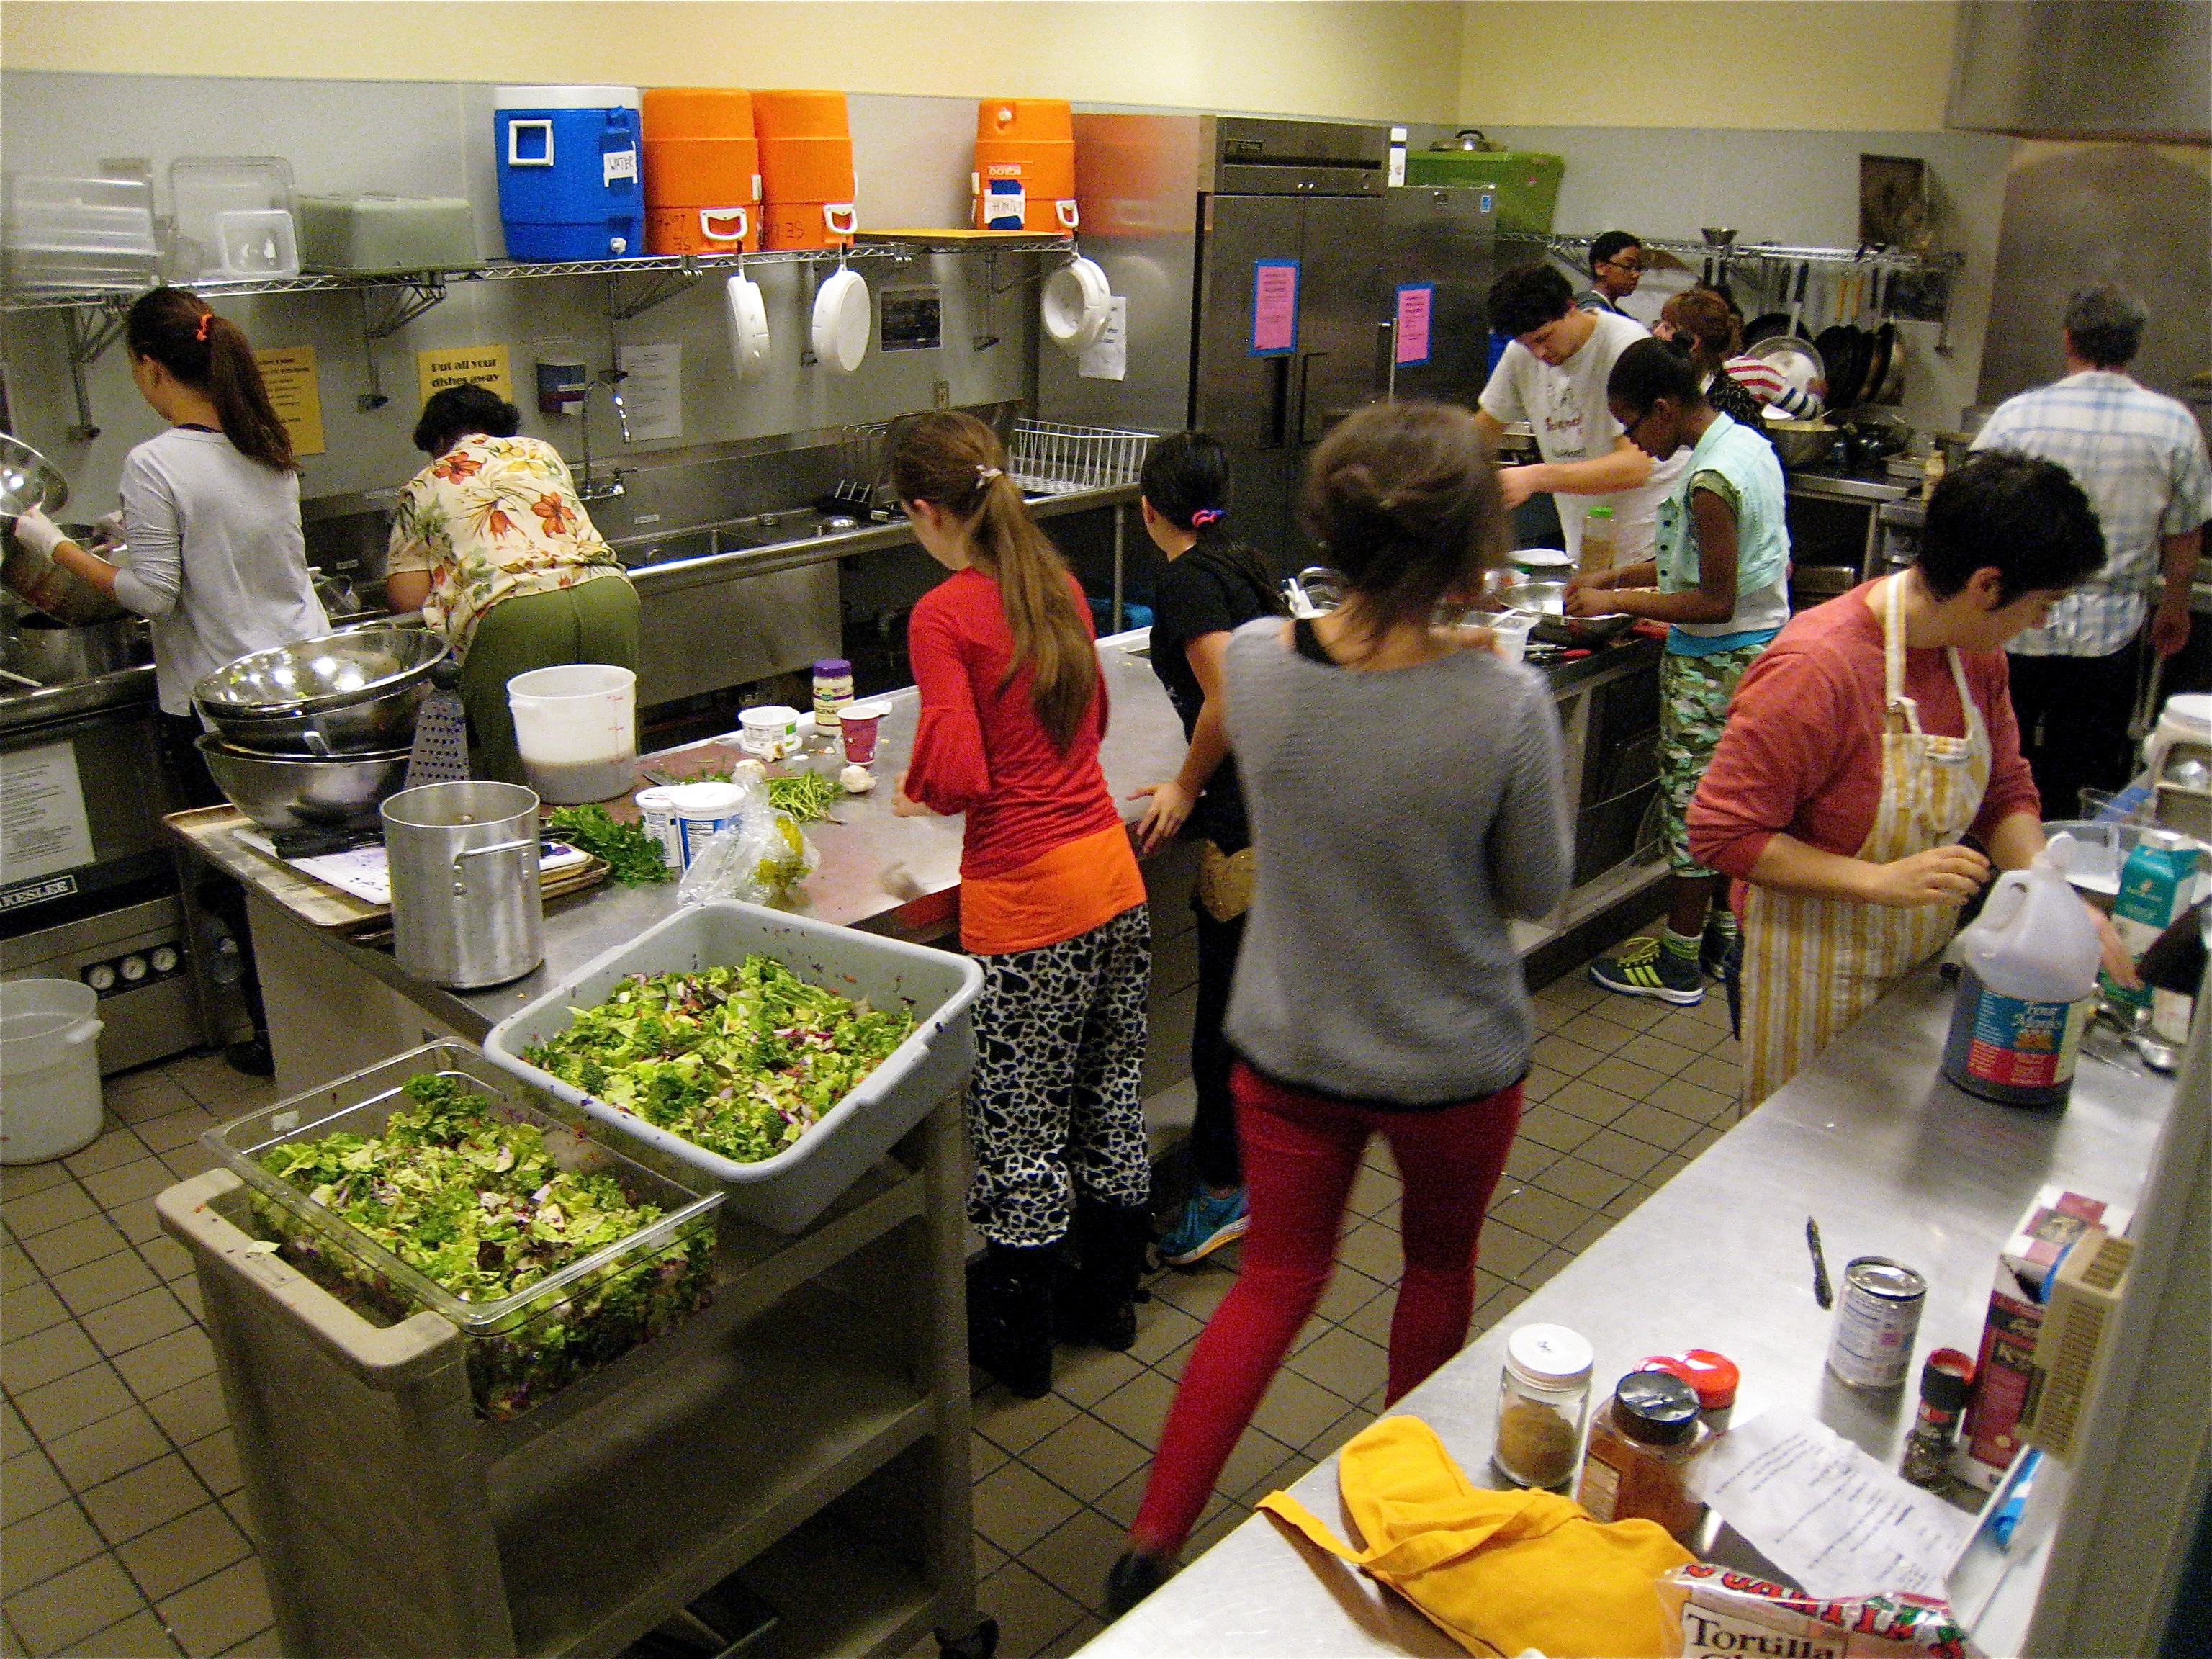 Rainier Community Center kitchen volunteers busily cooking for 60-80 diners